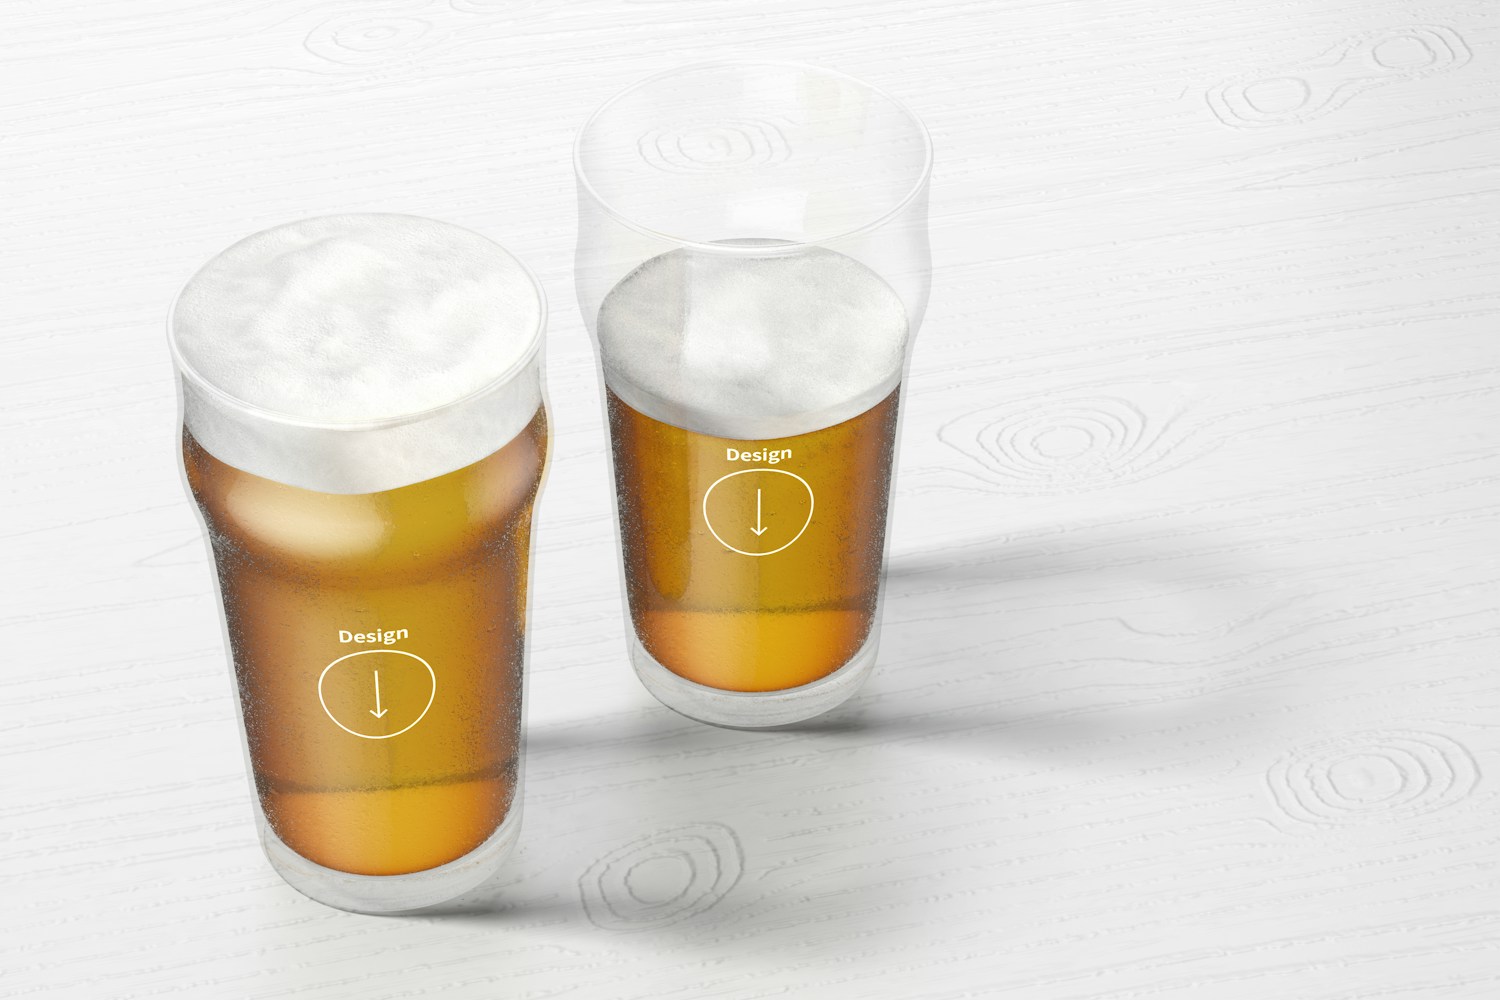 19 oz Beer Nonic Pint Glass Mockup, Perspective